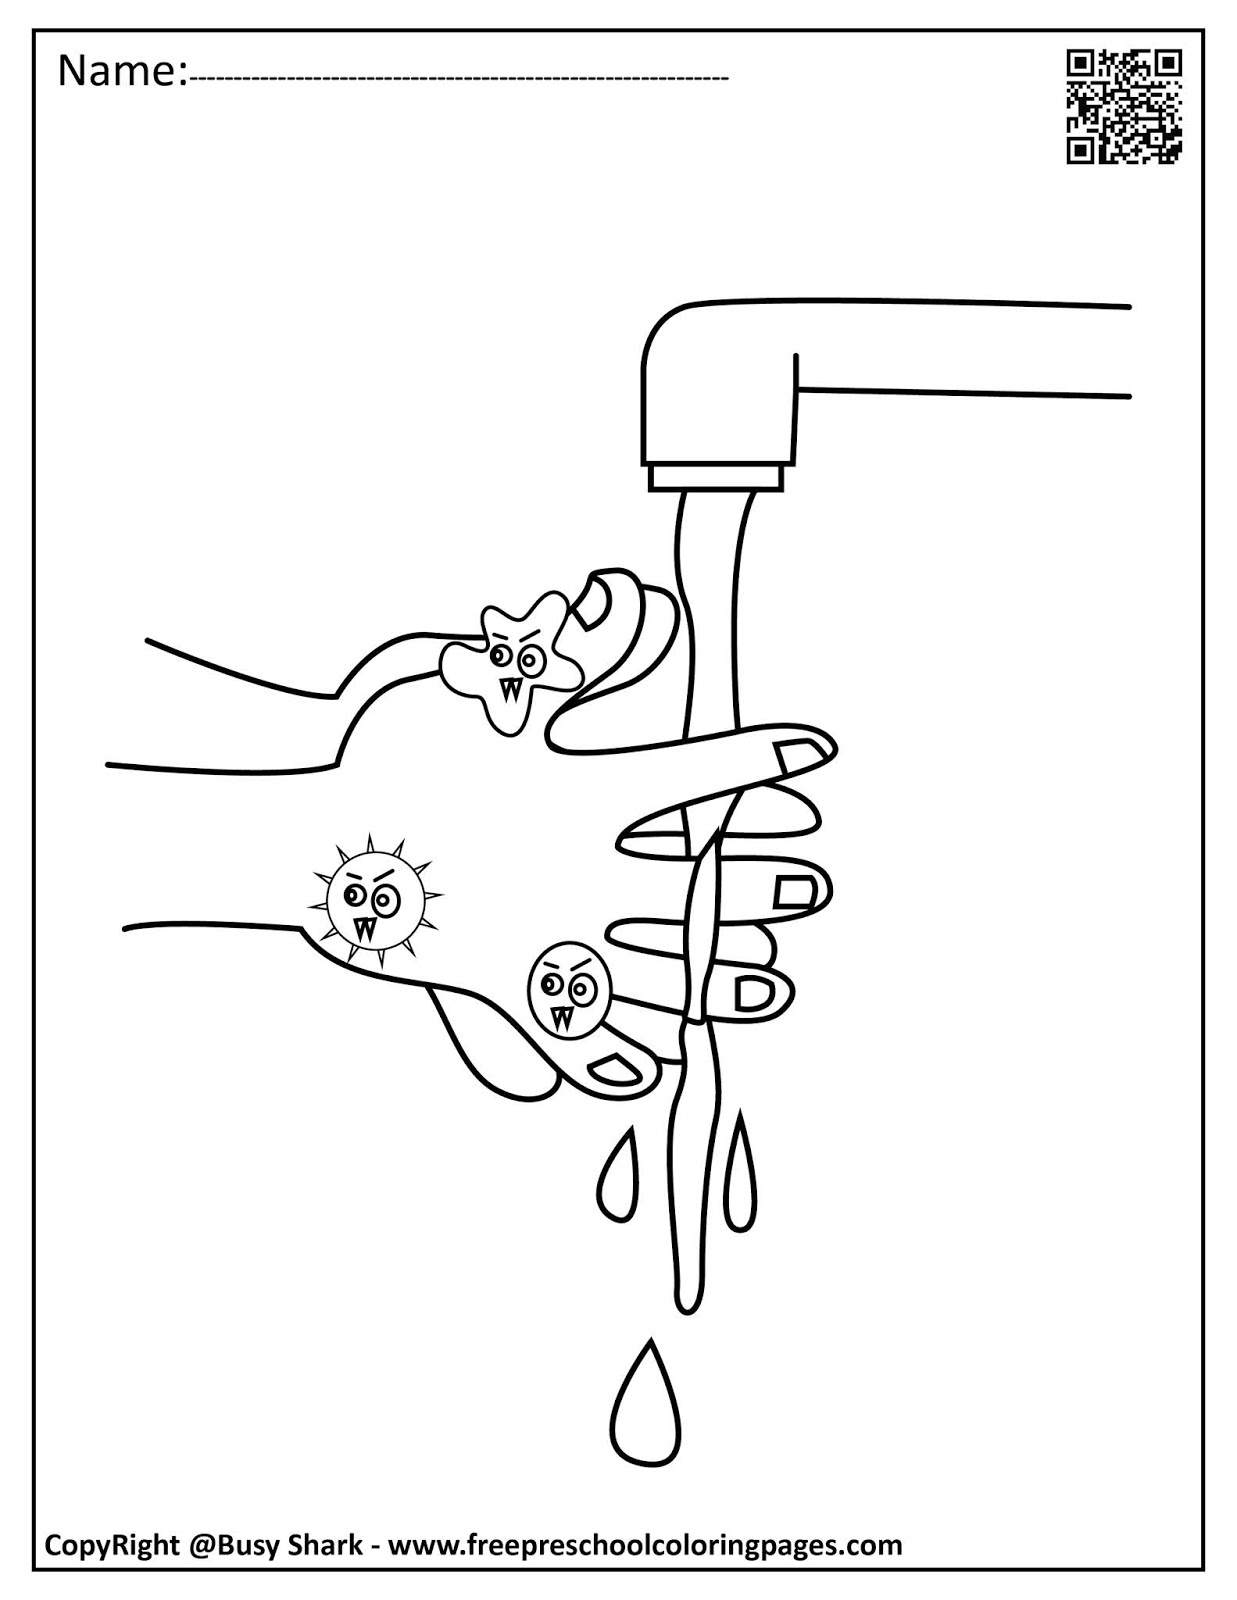 Download Set of Hand Washing and germs coloring pages